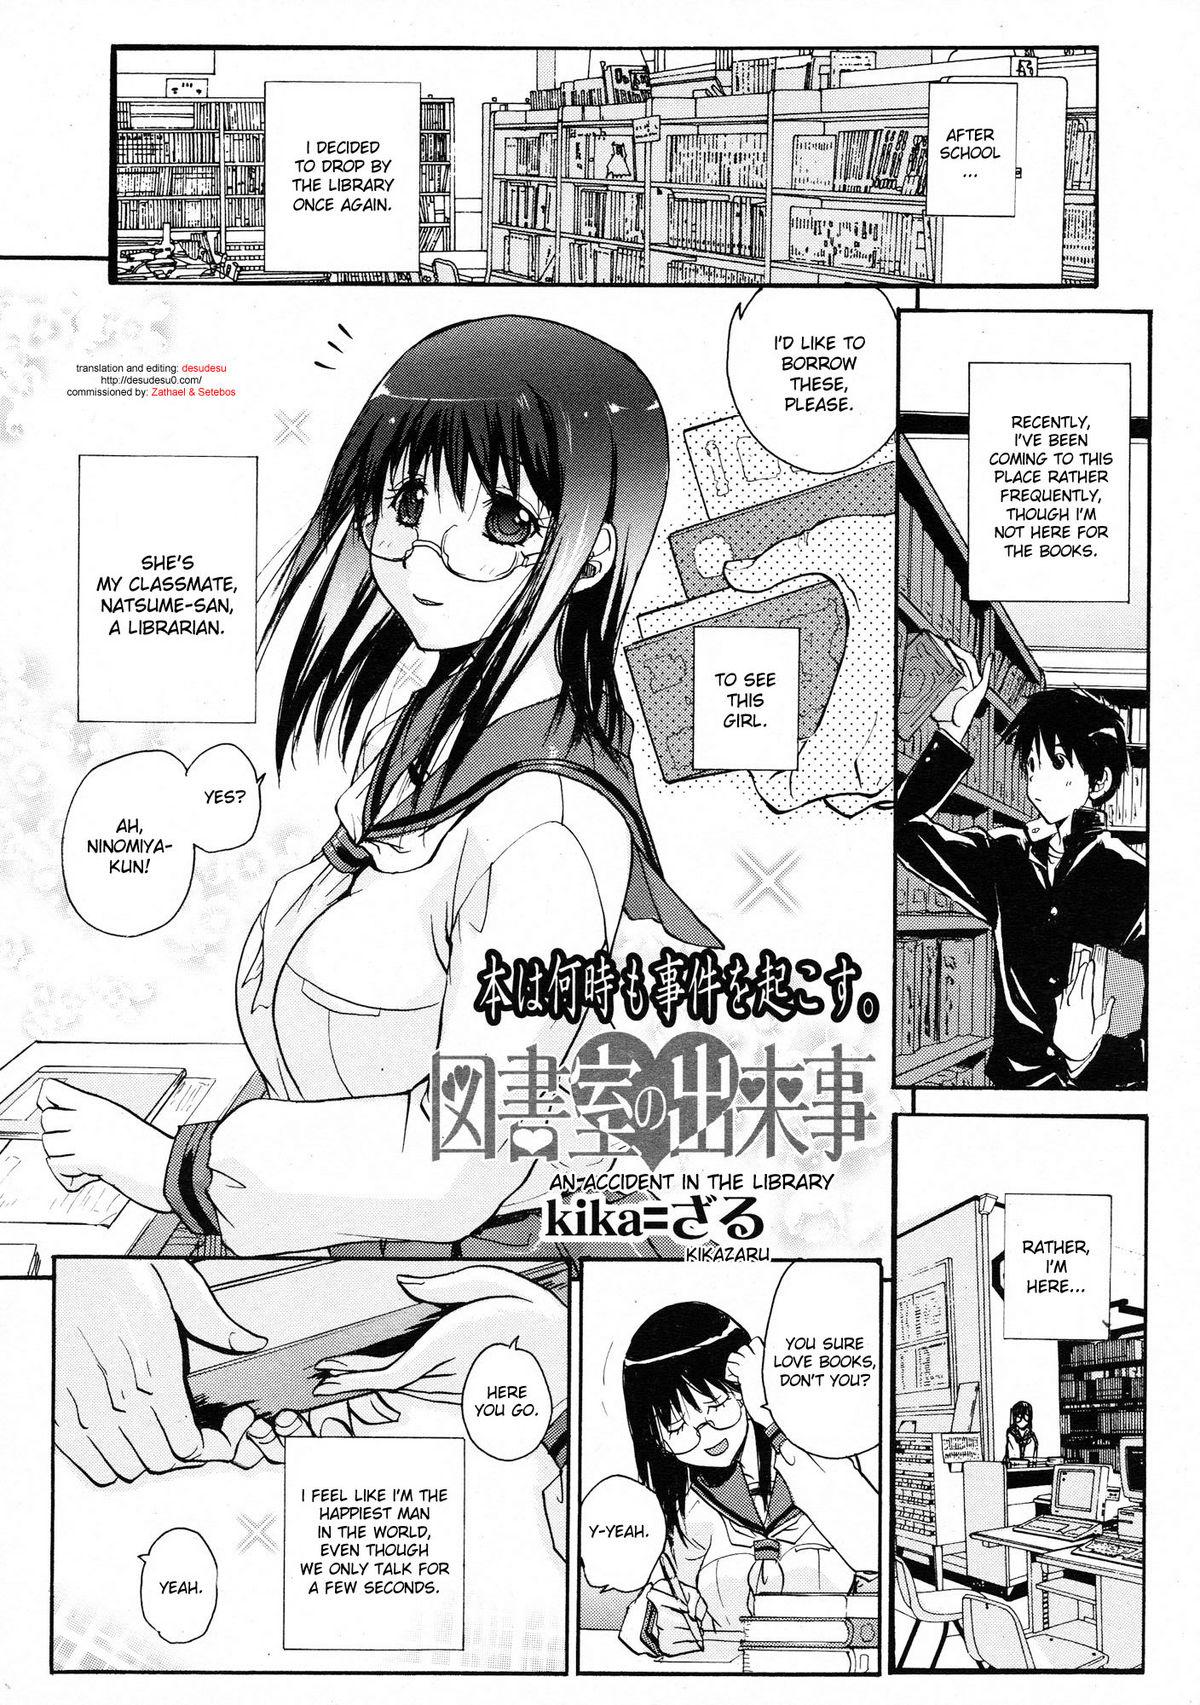 Load Toshoshitsu no Dekigoto | An Accident in the Library Hermana - Picture 1